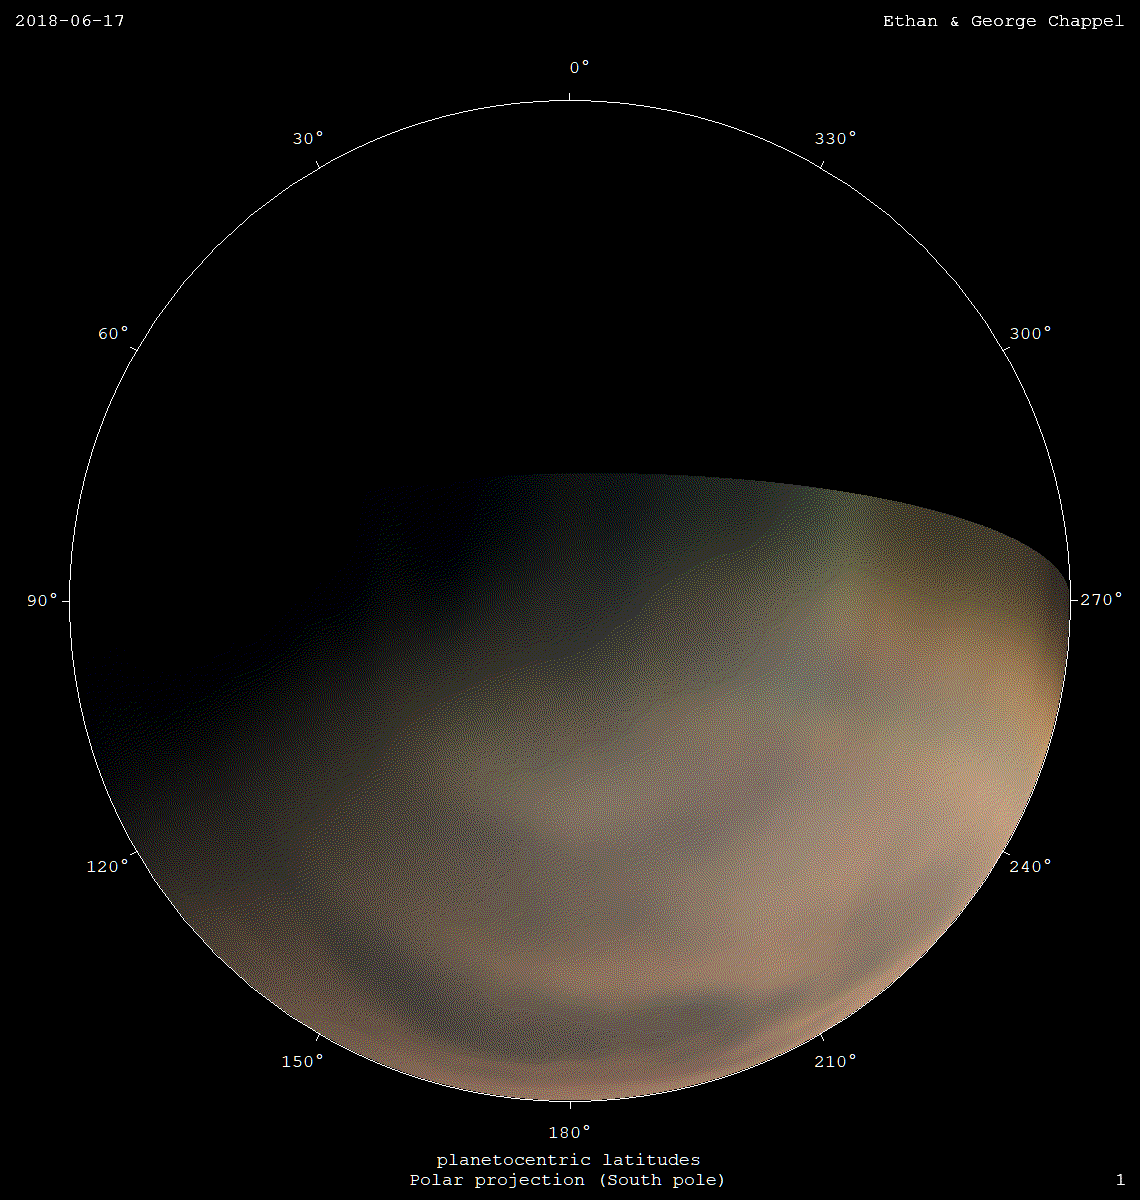 With the arrival of spring on Mars' southern hemisphere, the south polar cap began to shrink as it emerged from darkness.